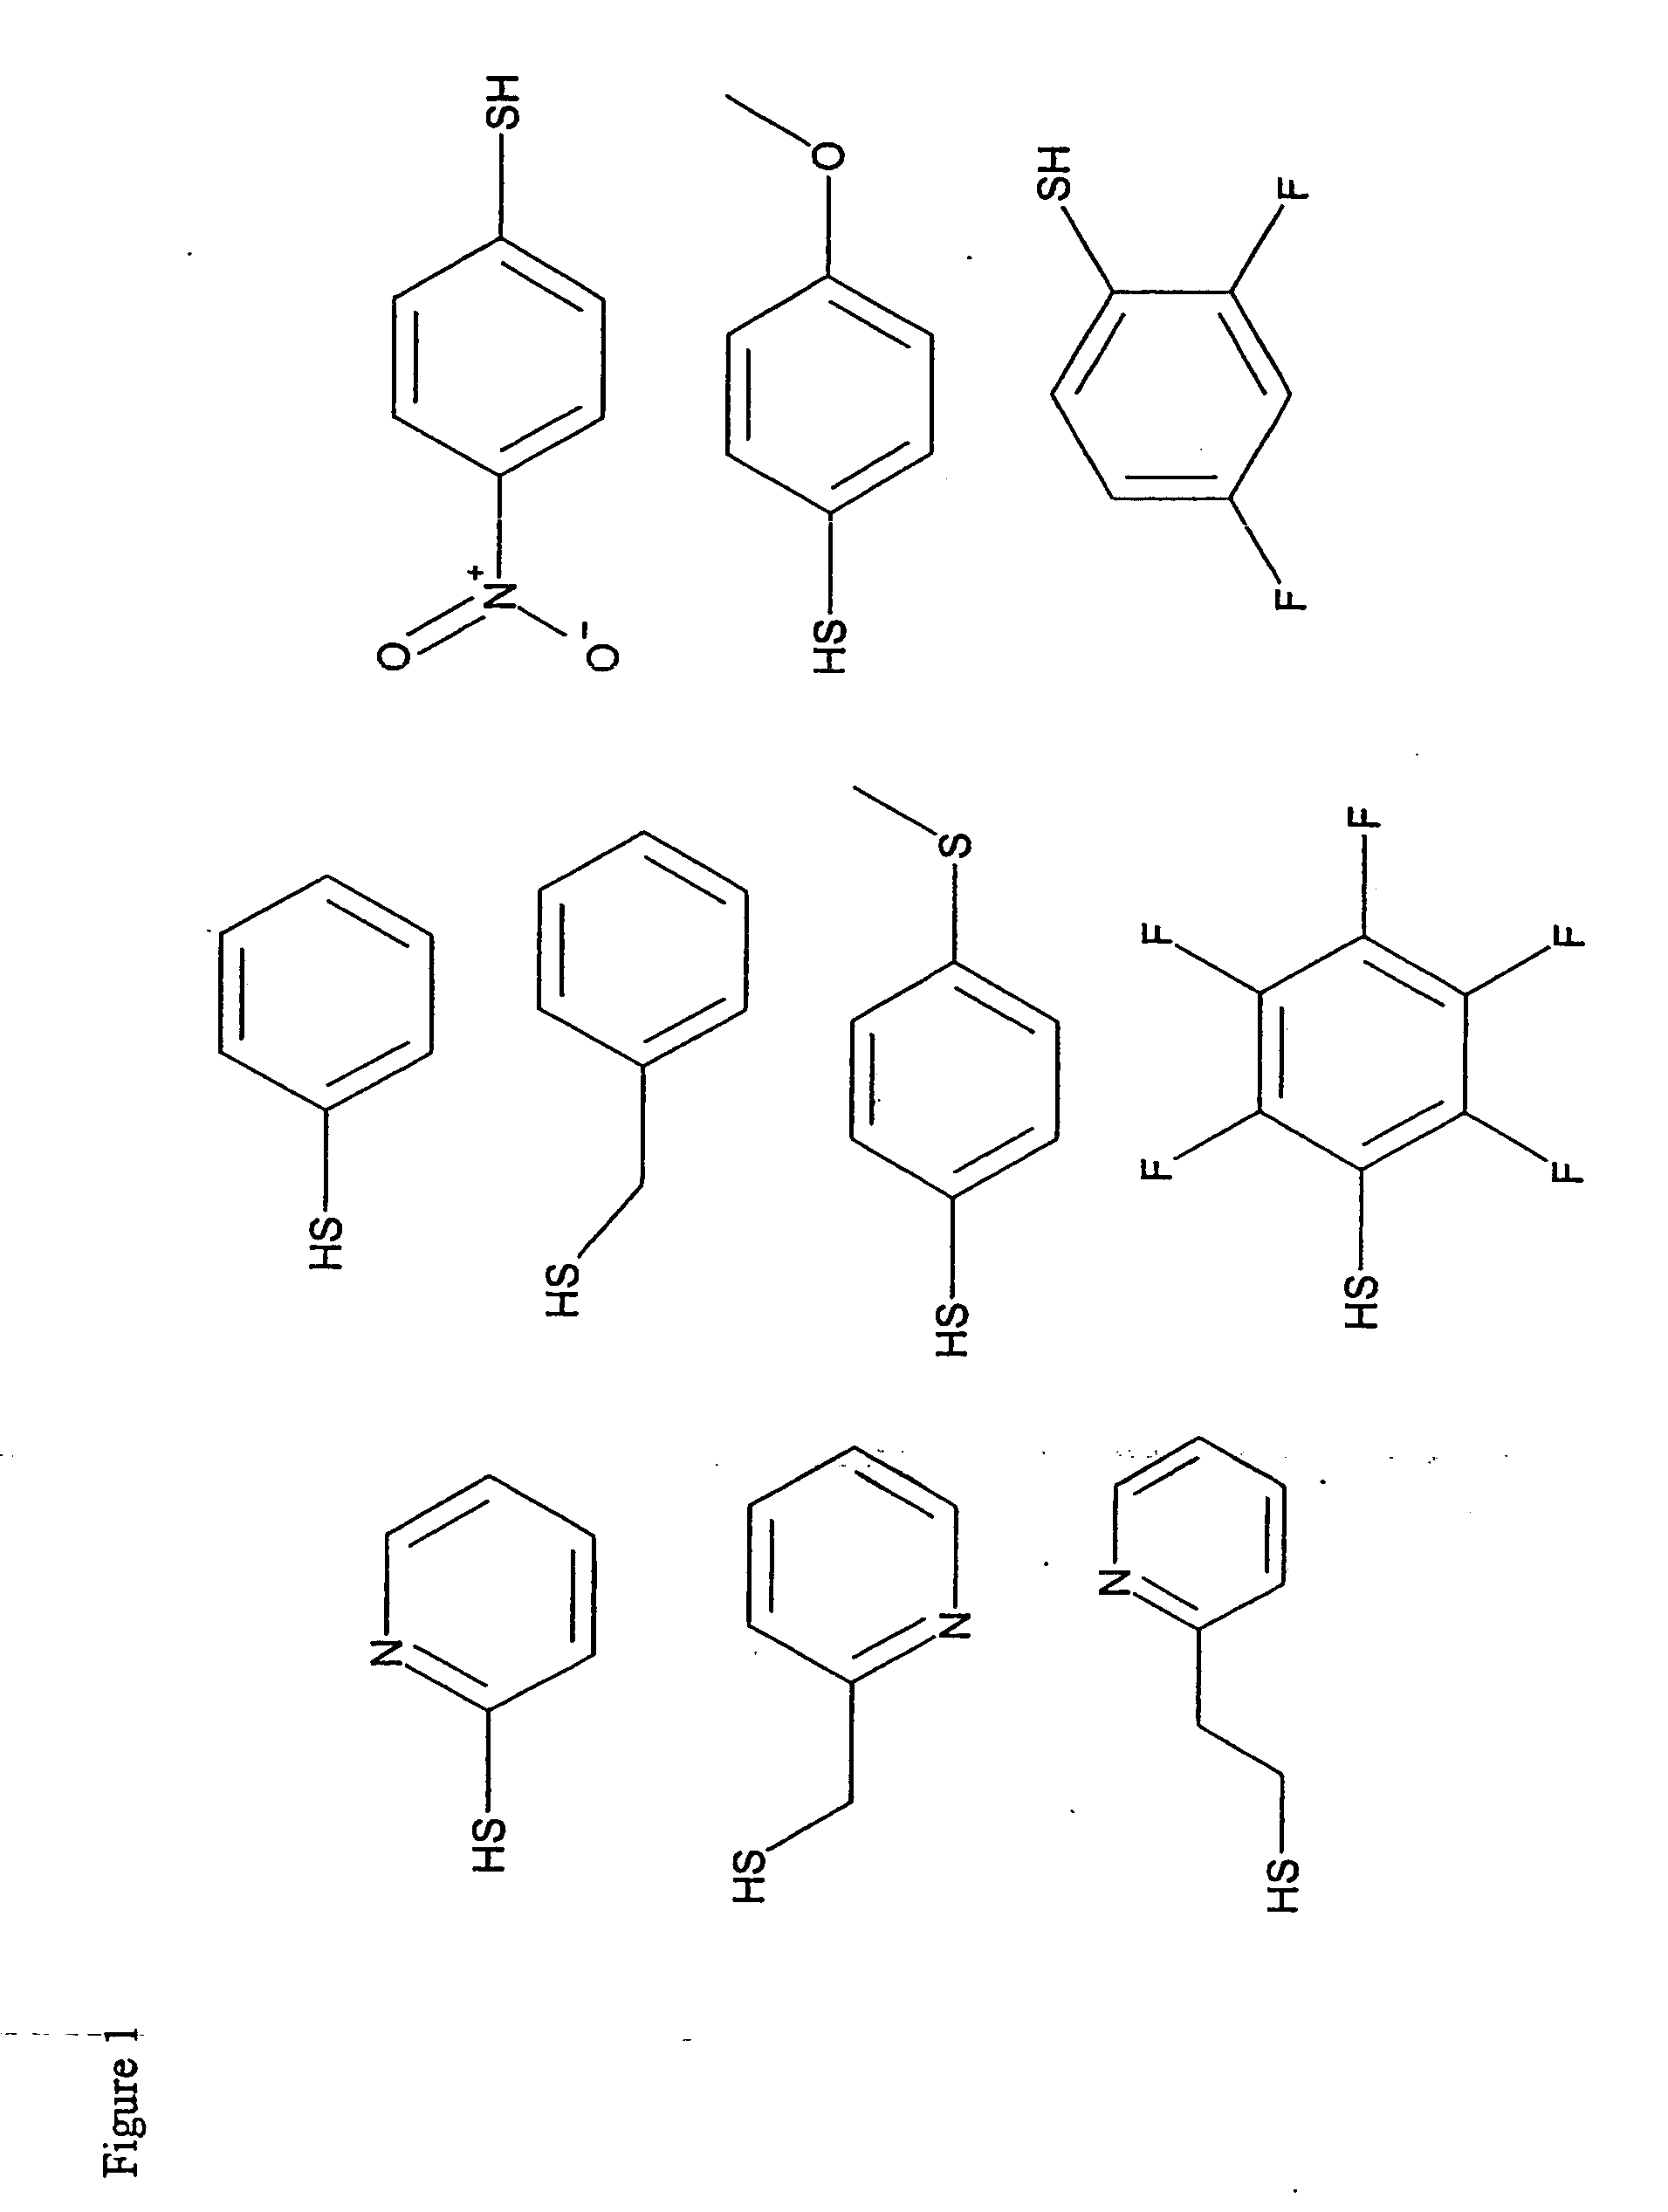 Method of separation using aromatic thioether ligands